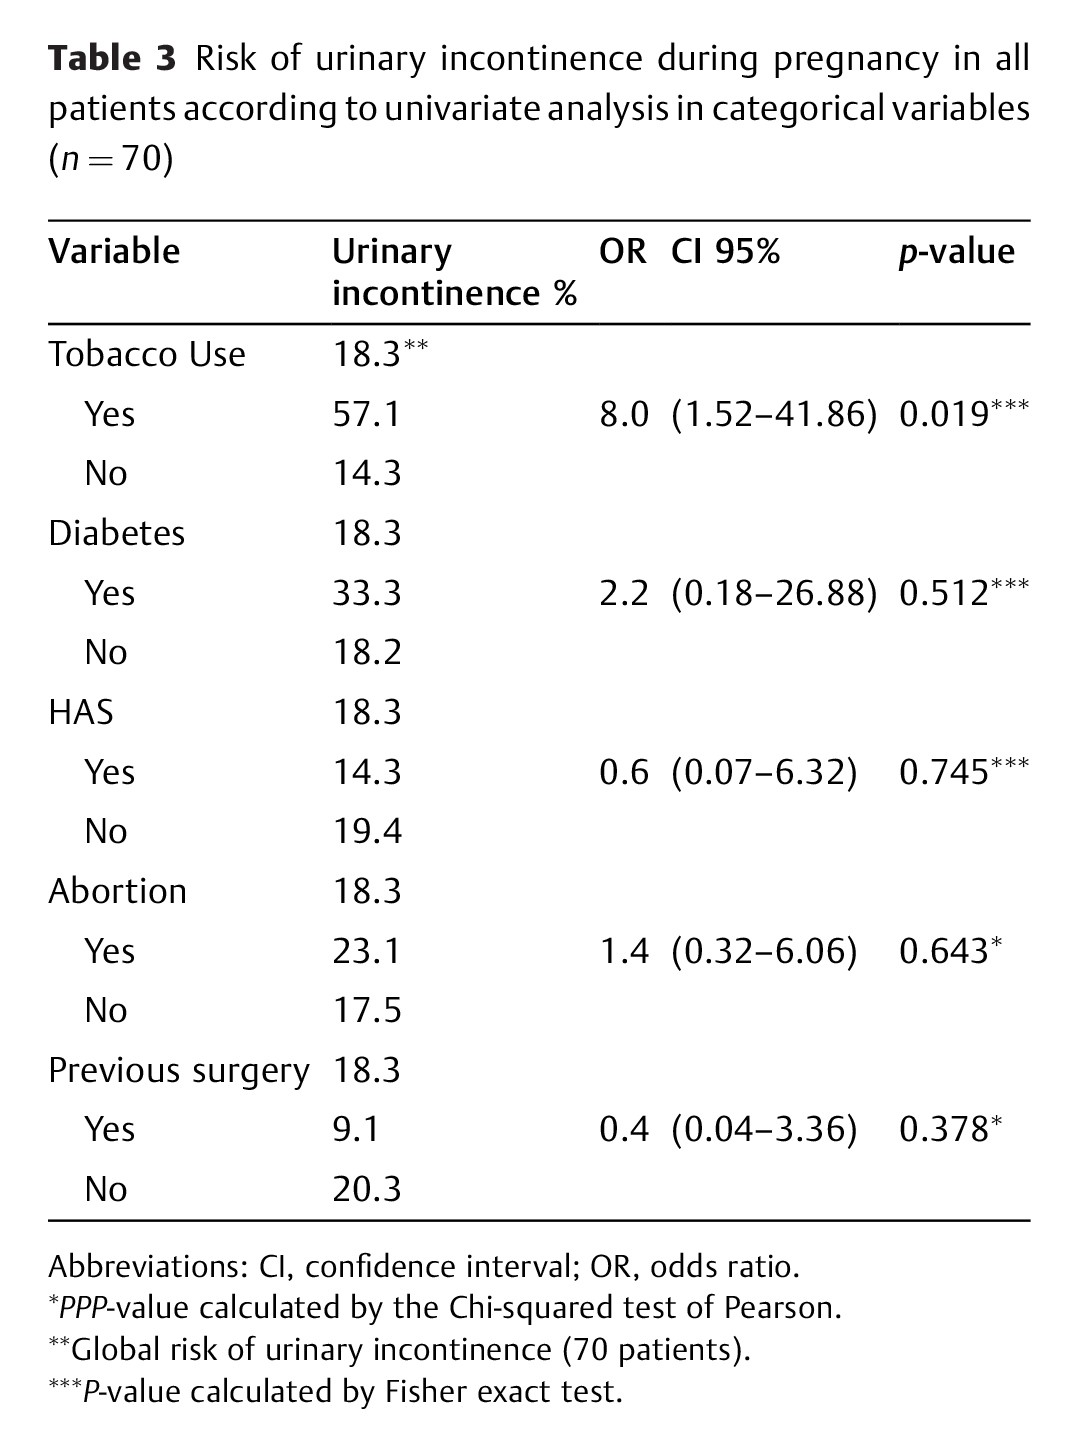 Risk Factors for Urinary Incontinence in Pregnancy A Case Control Study-3.jpg